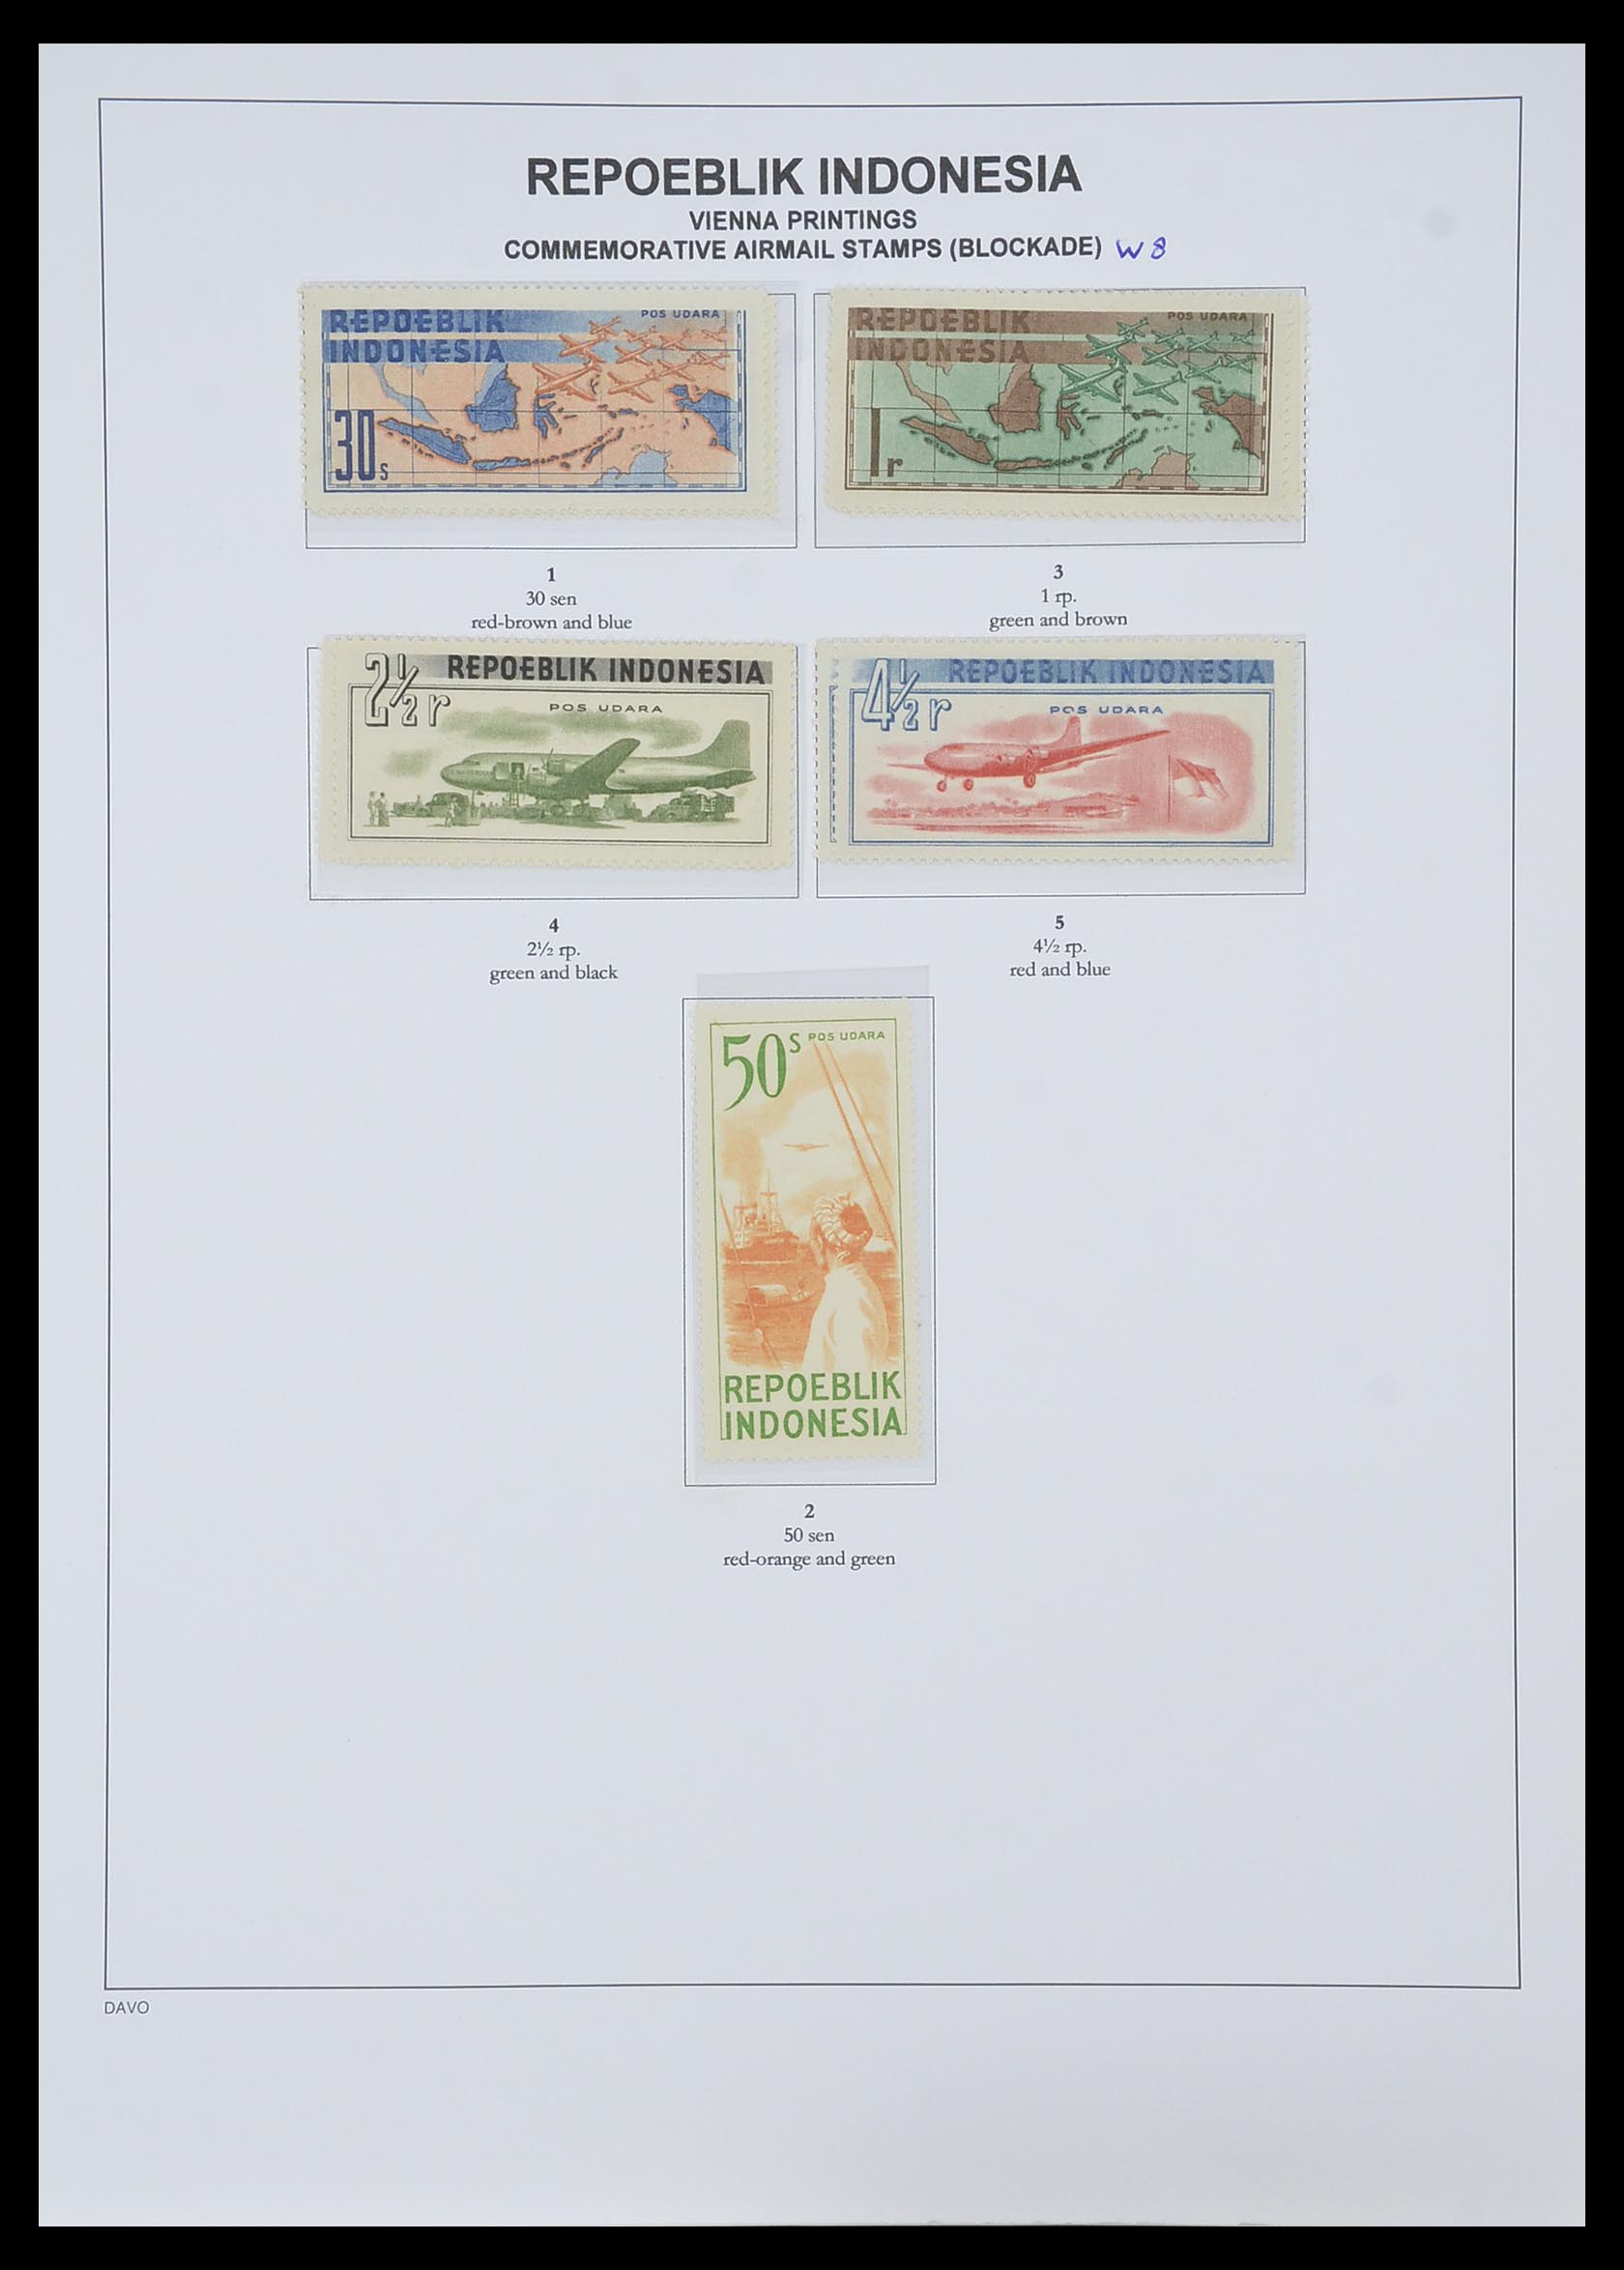 33988 016 - Stamp collection 33988 Vienna printings Indonesia.